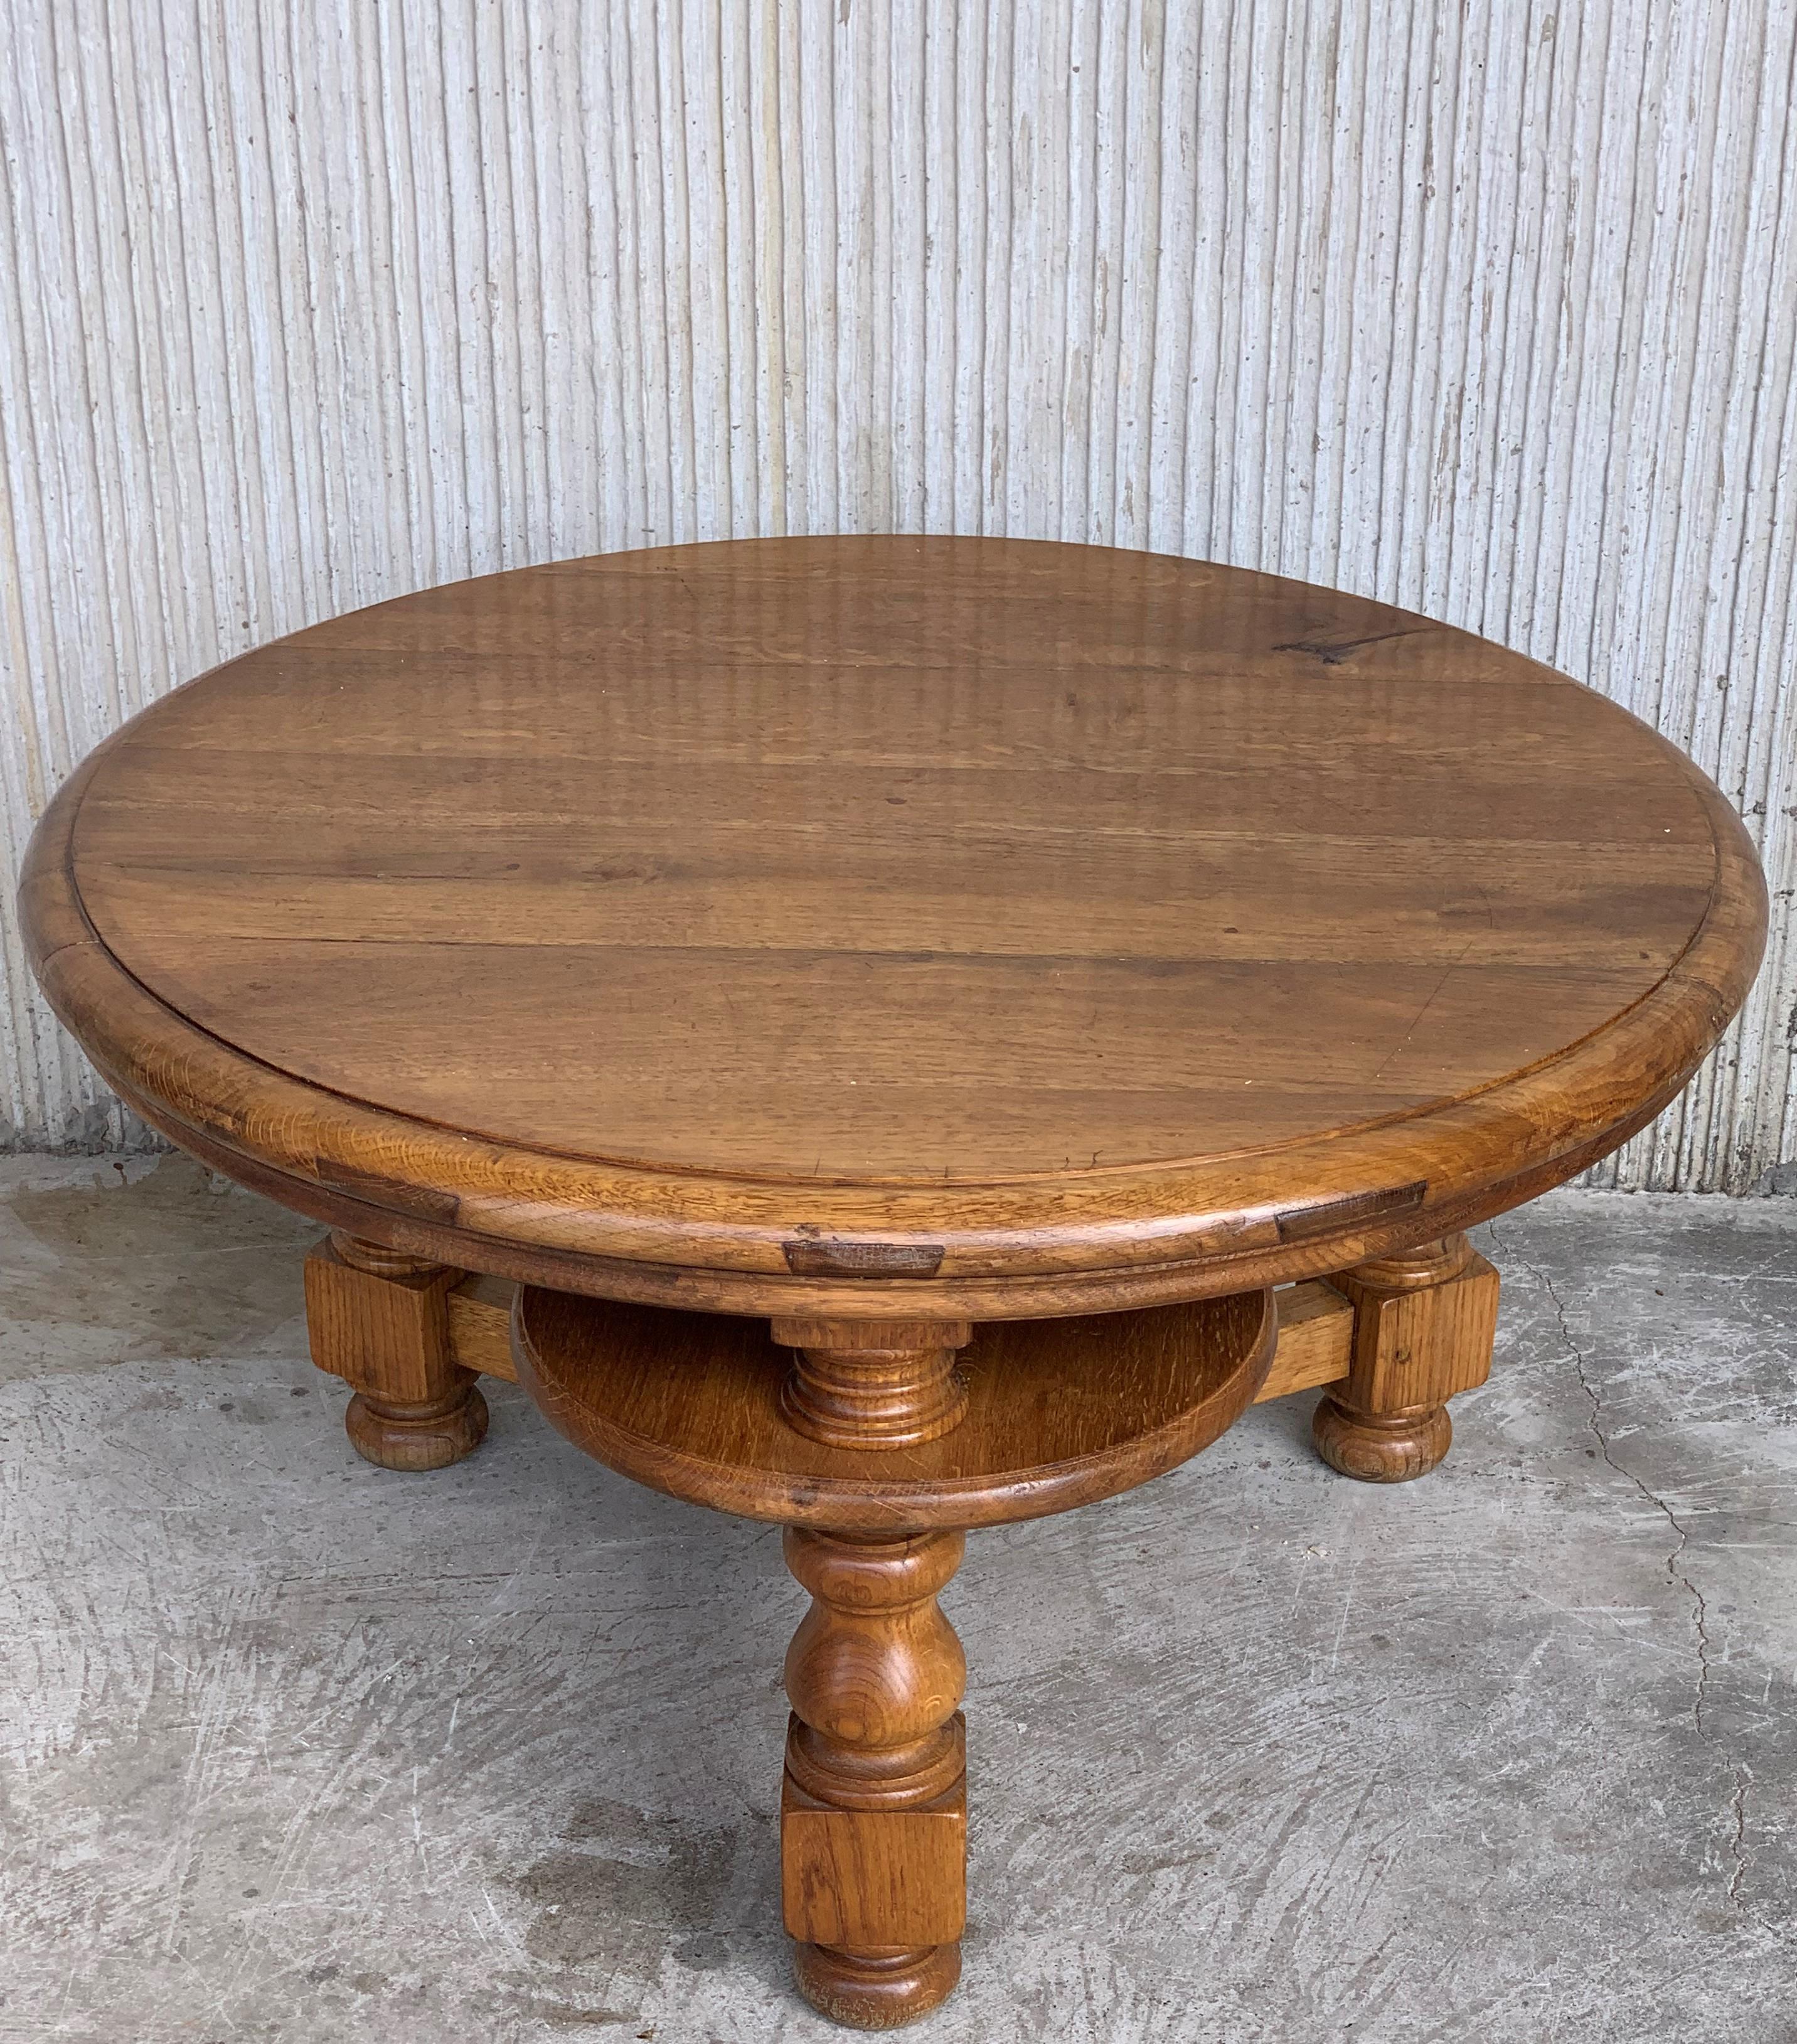 Pine 20th Round Country Coffee or Picnic Table with Three Auxiliars Tables or Stools